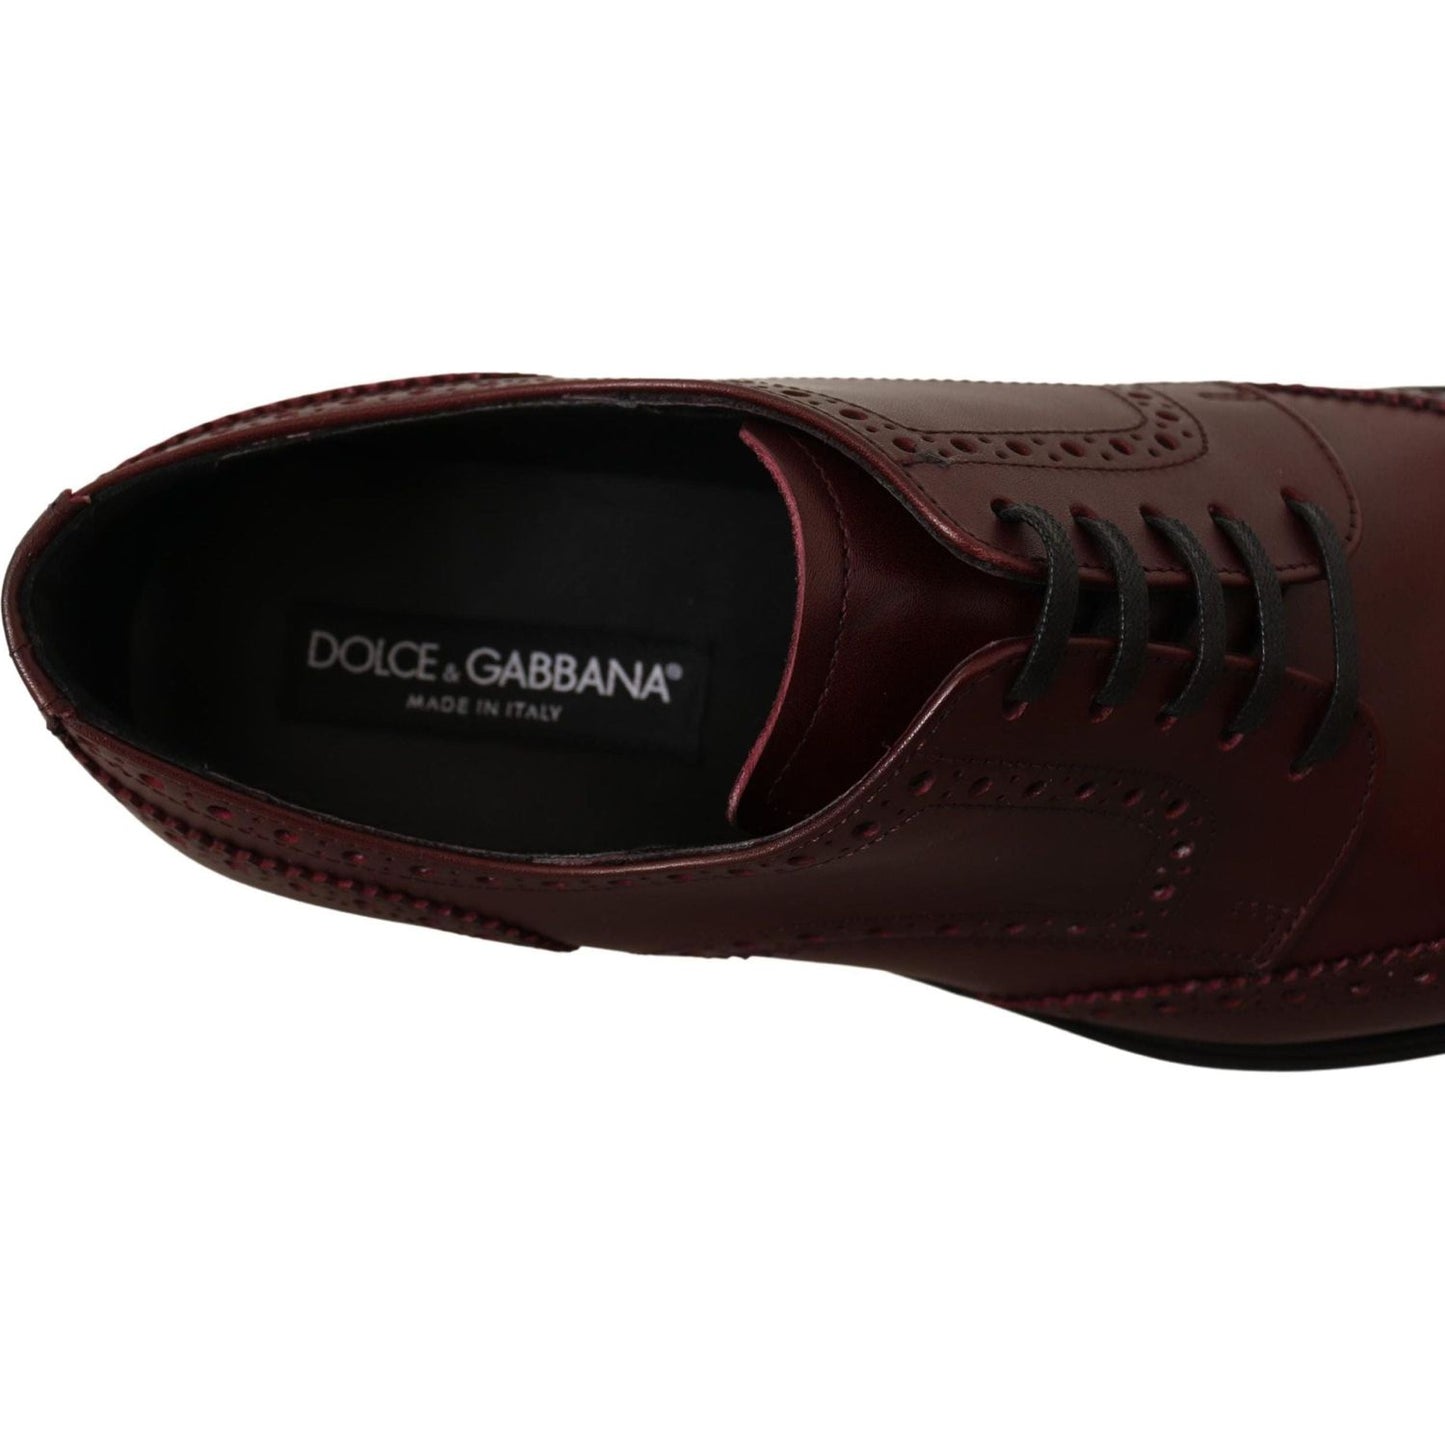 Dolce & Gabbana Elegant Bordeaux Leather Derby Shoes bordeaux-leather-oxford-wingtip-formal-shoes IMG_4873-scaled-049988df-81a.jpg